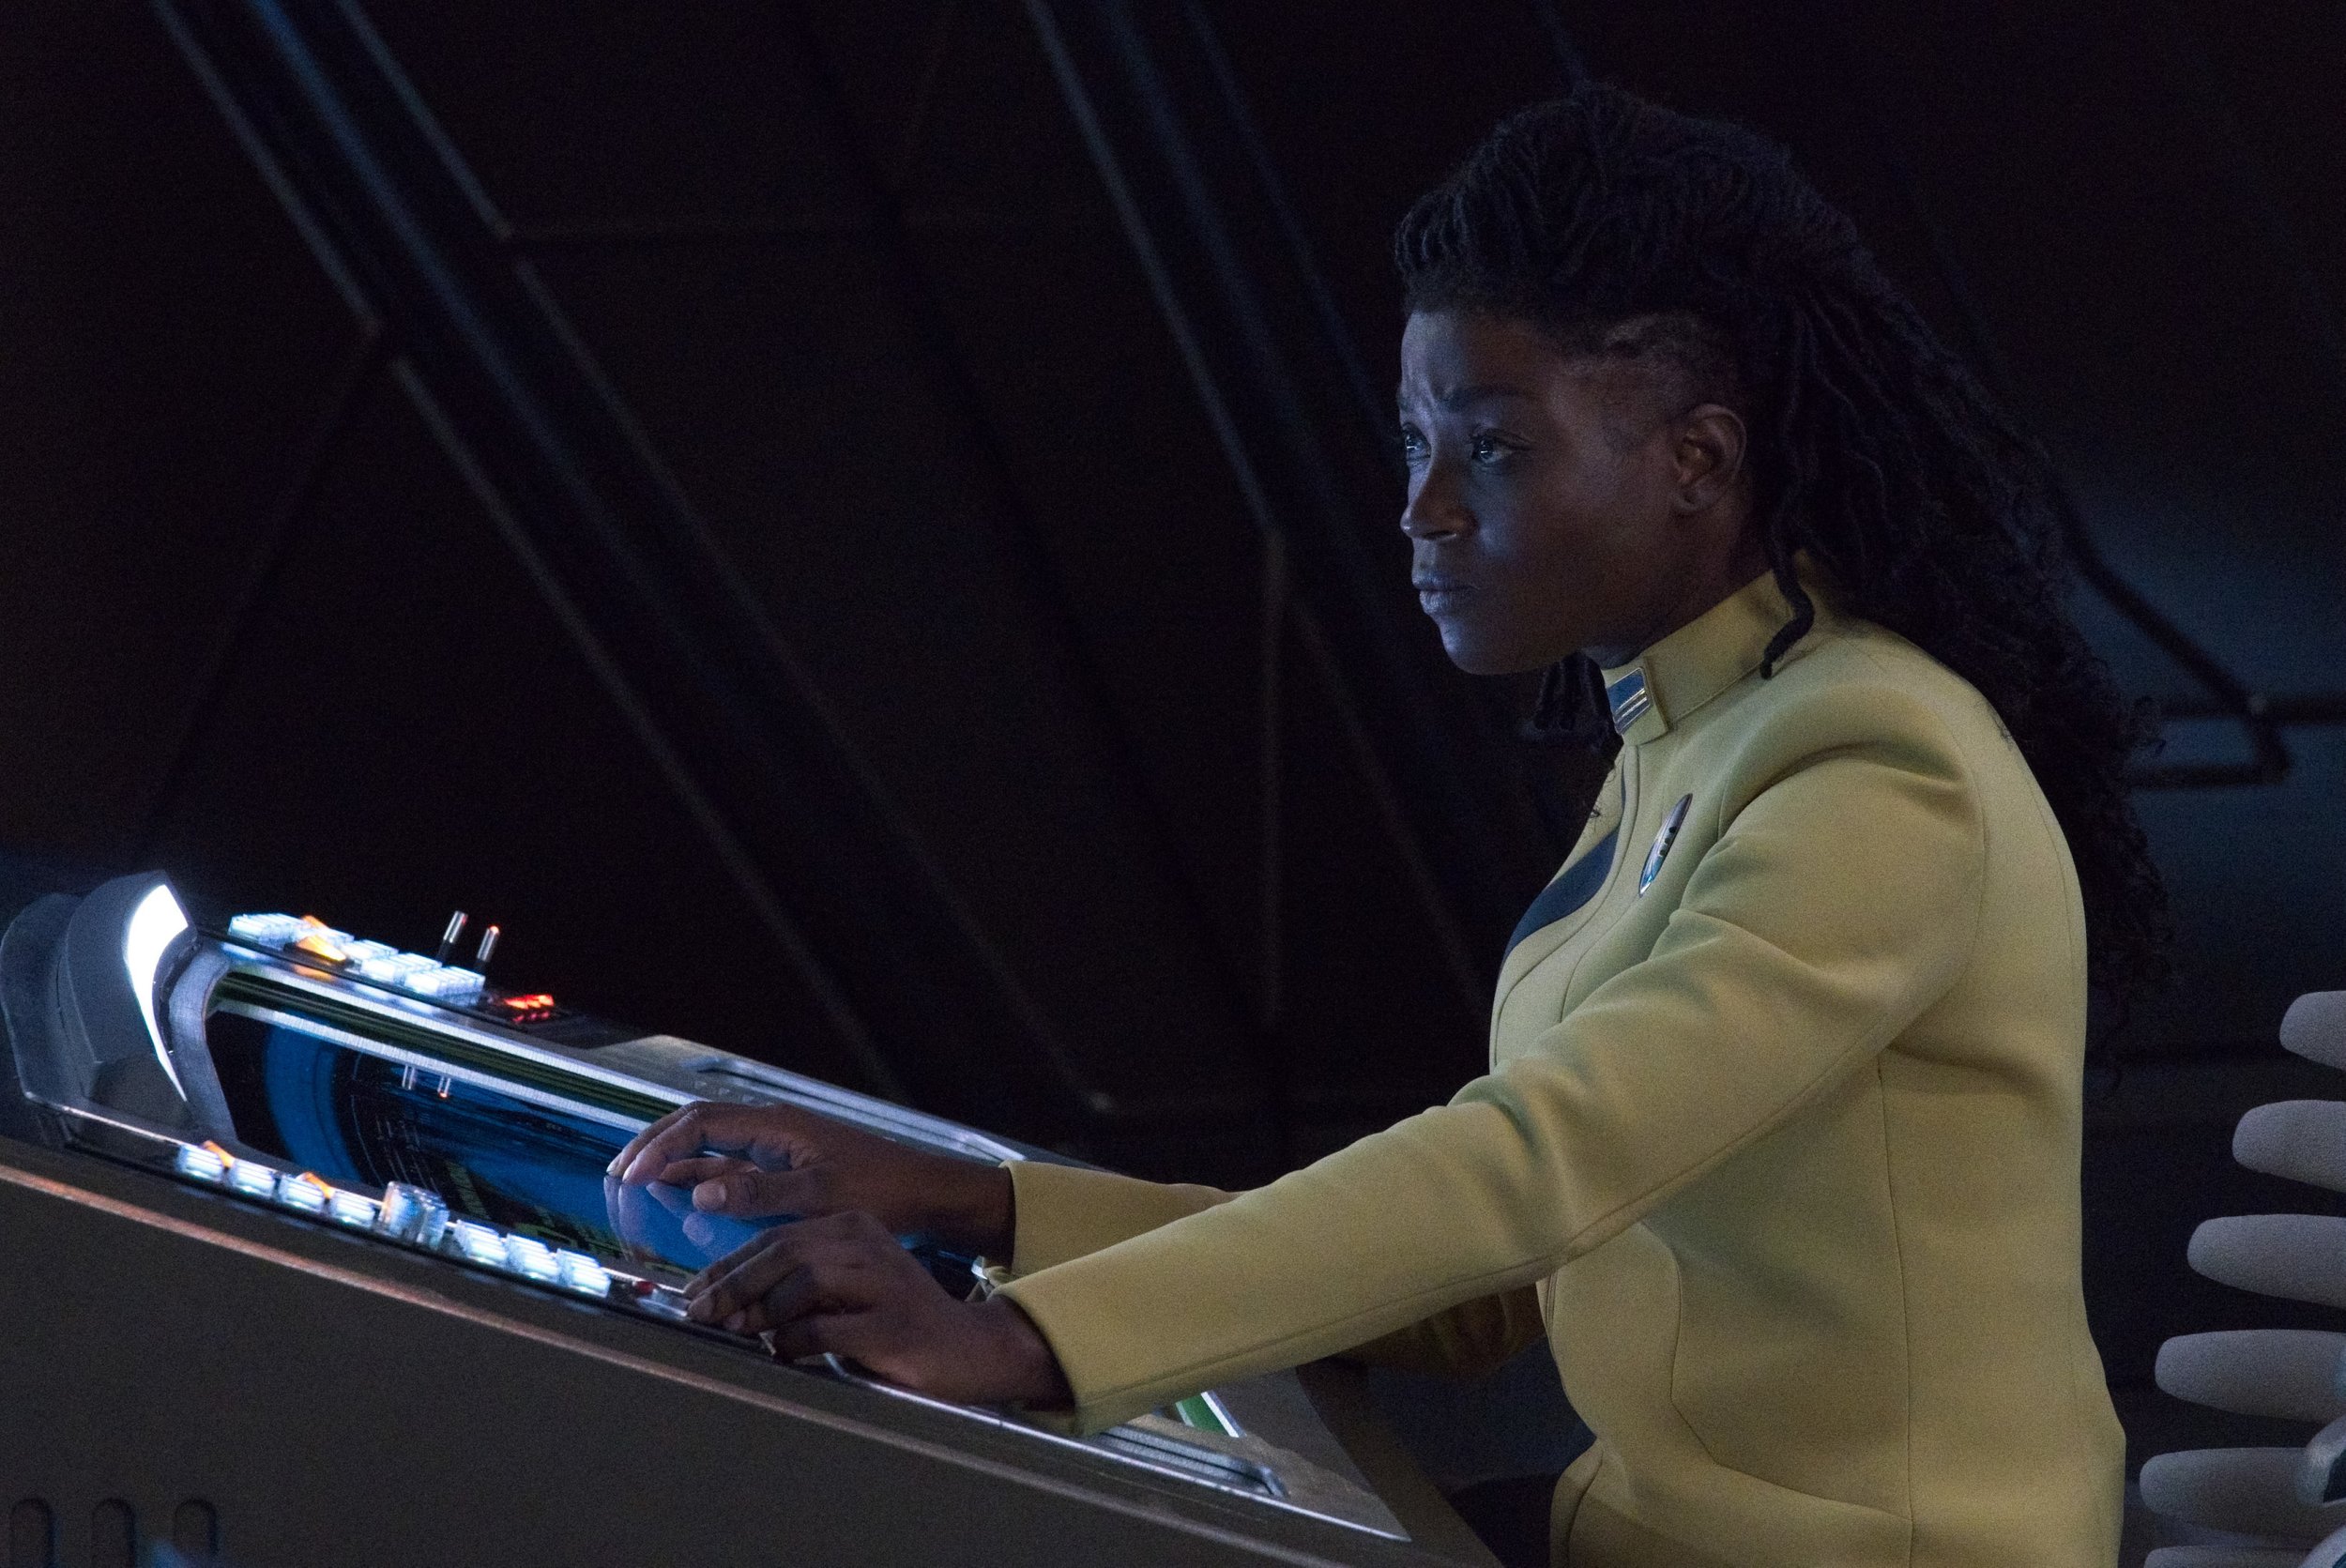   Pictured: Oyin Oladejo as Lt. Joann Owosekun of the Paramount+ original series STAR TREK: DISCOVERY. Photo Cr: Michael Gibson/ViacomCBS © 2021 ViacomCBS. All Rights Reserved.  